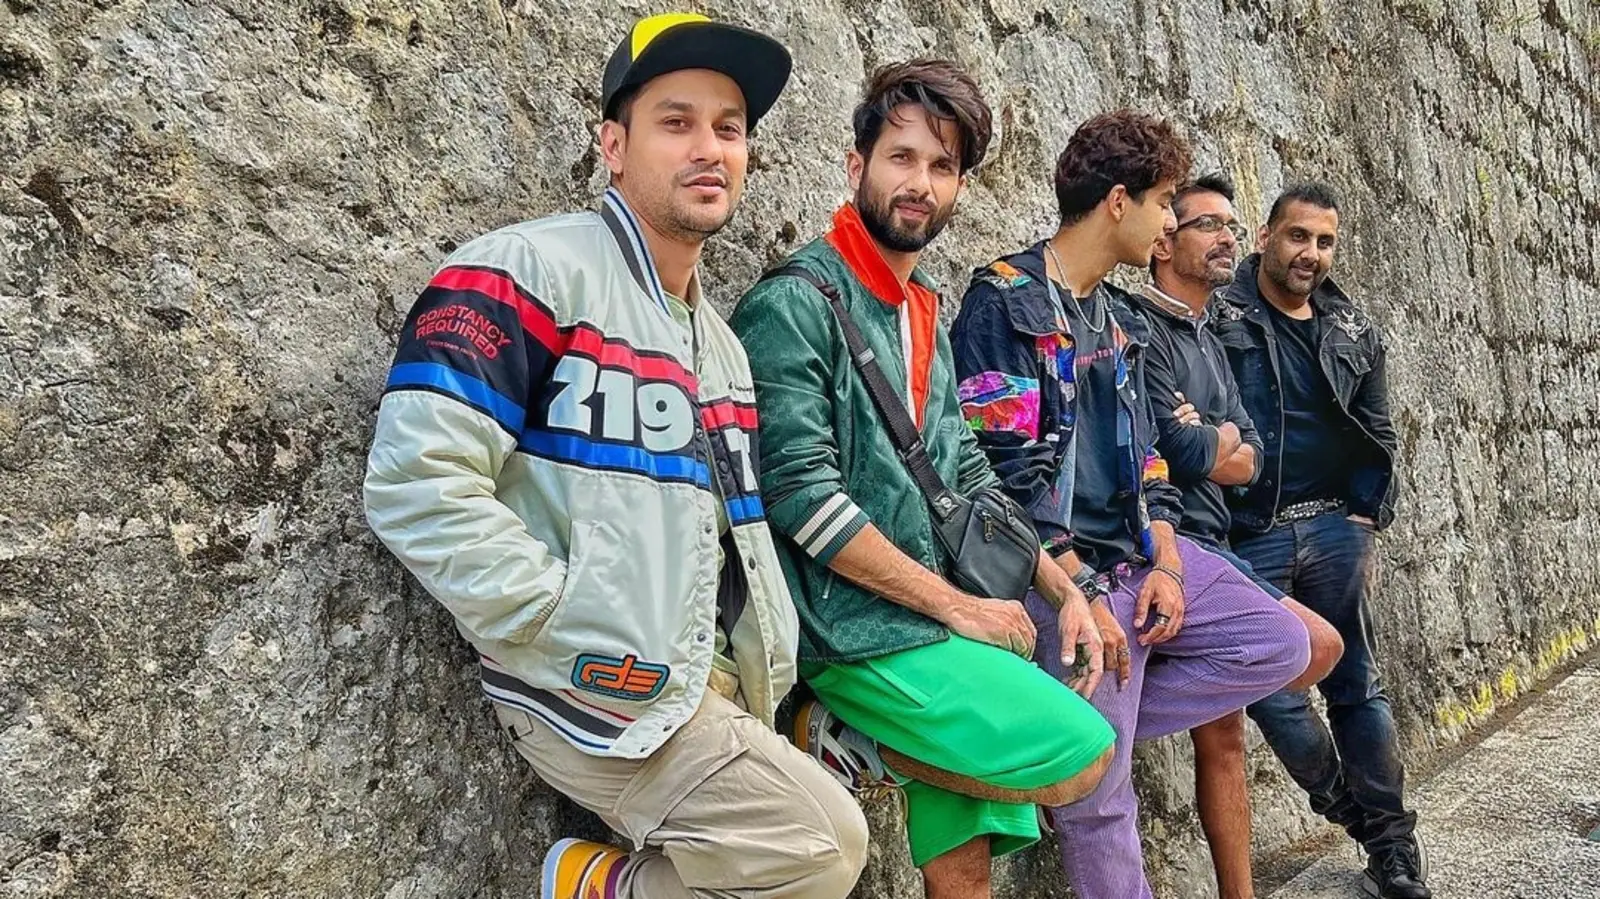 Kunal Kemmu posts pic with Shahid Kapoor, Ishaan Khatter from Europe trip, fans ask ‘how expensive was this trip?’